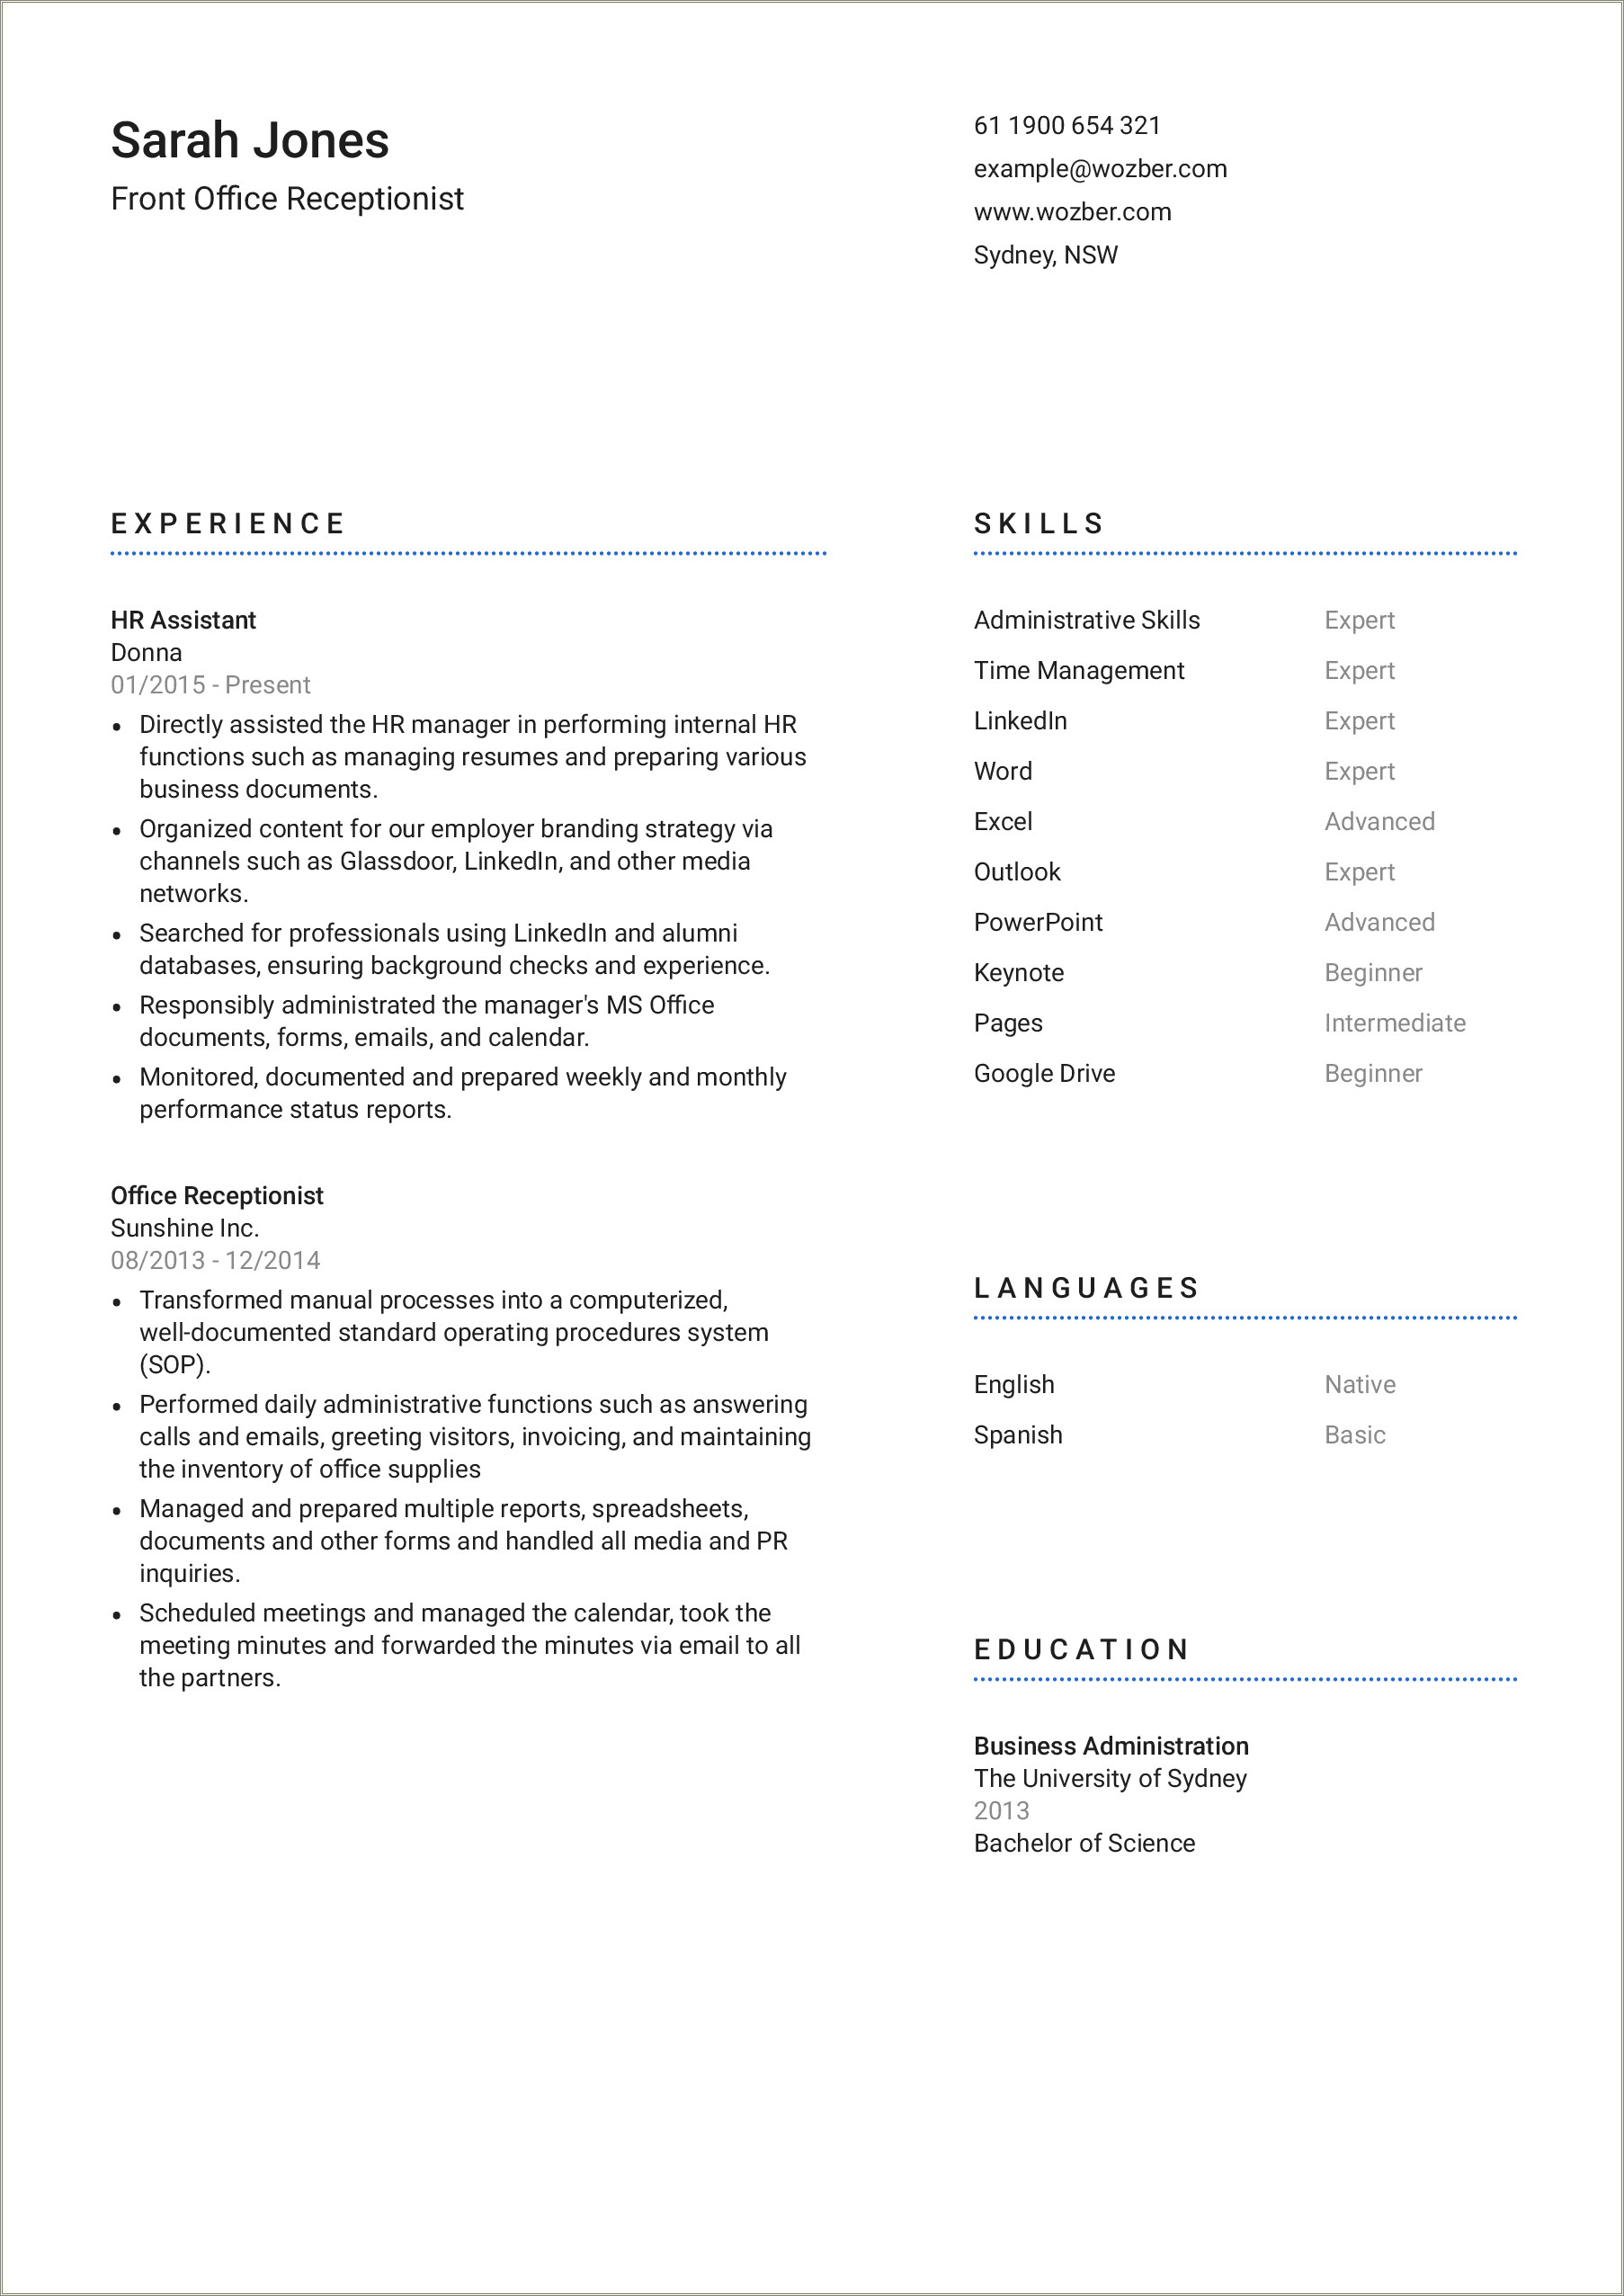 Email Resume To Potential Employer Template